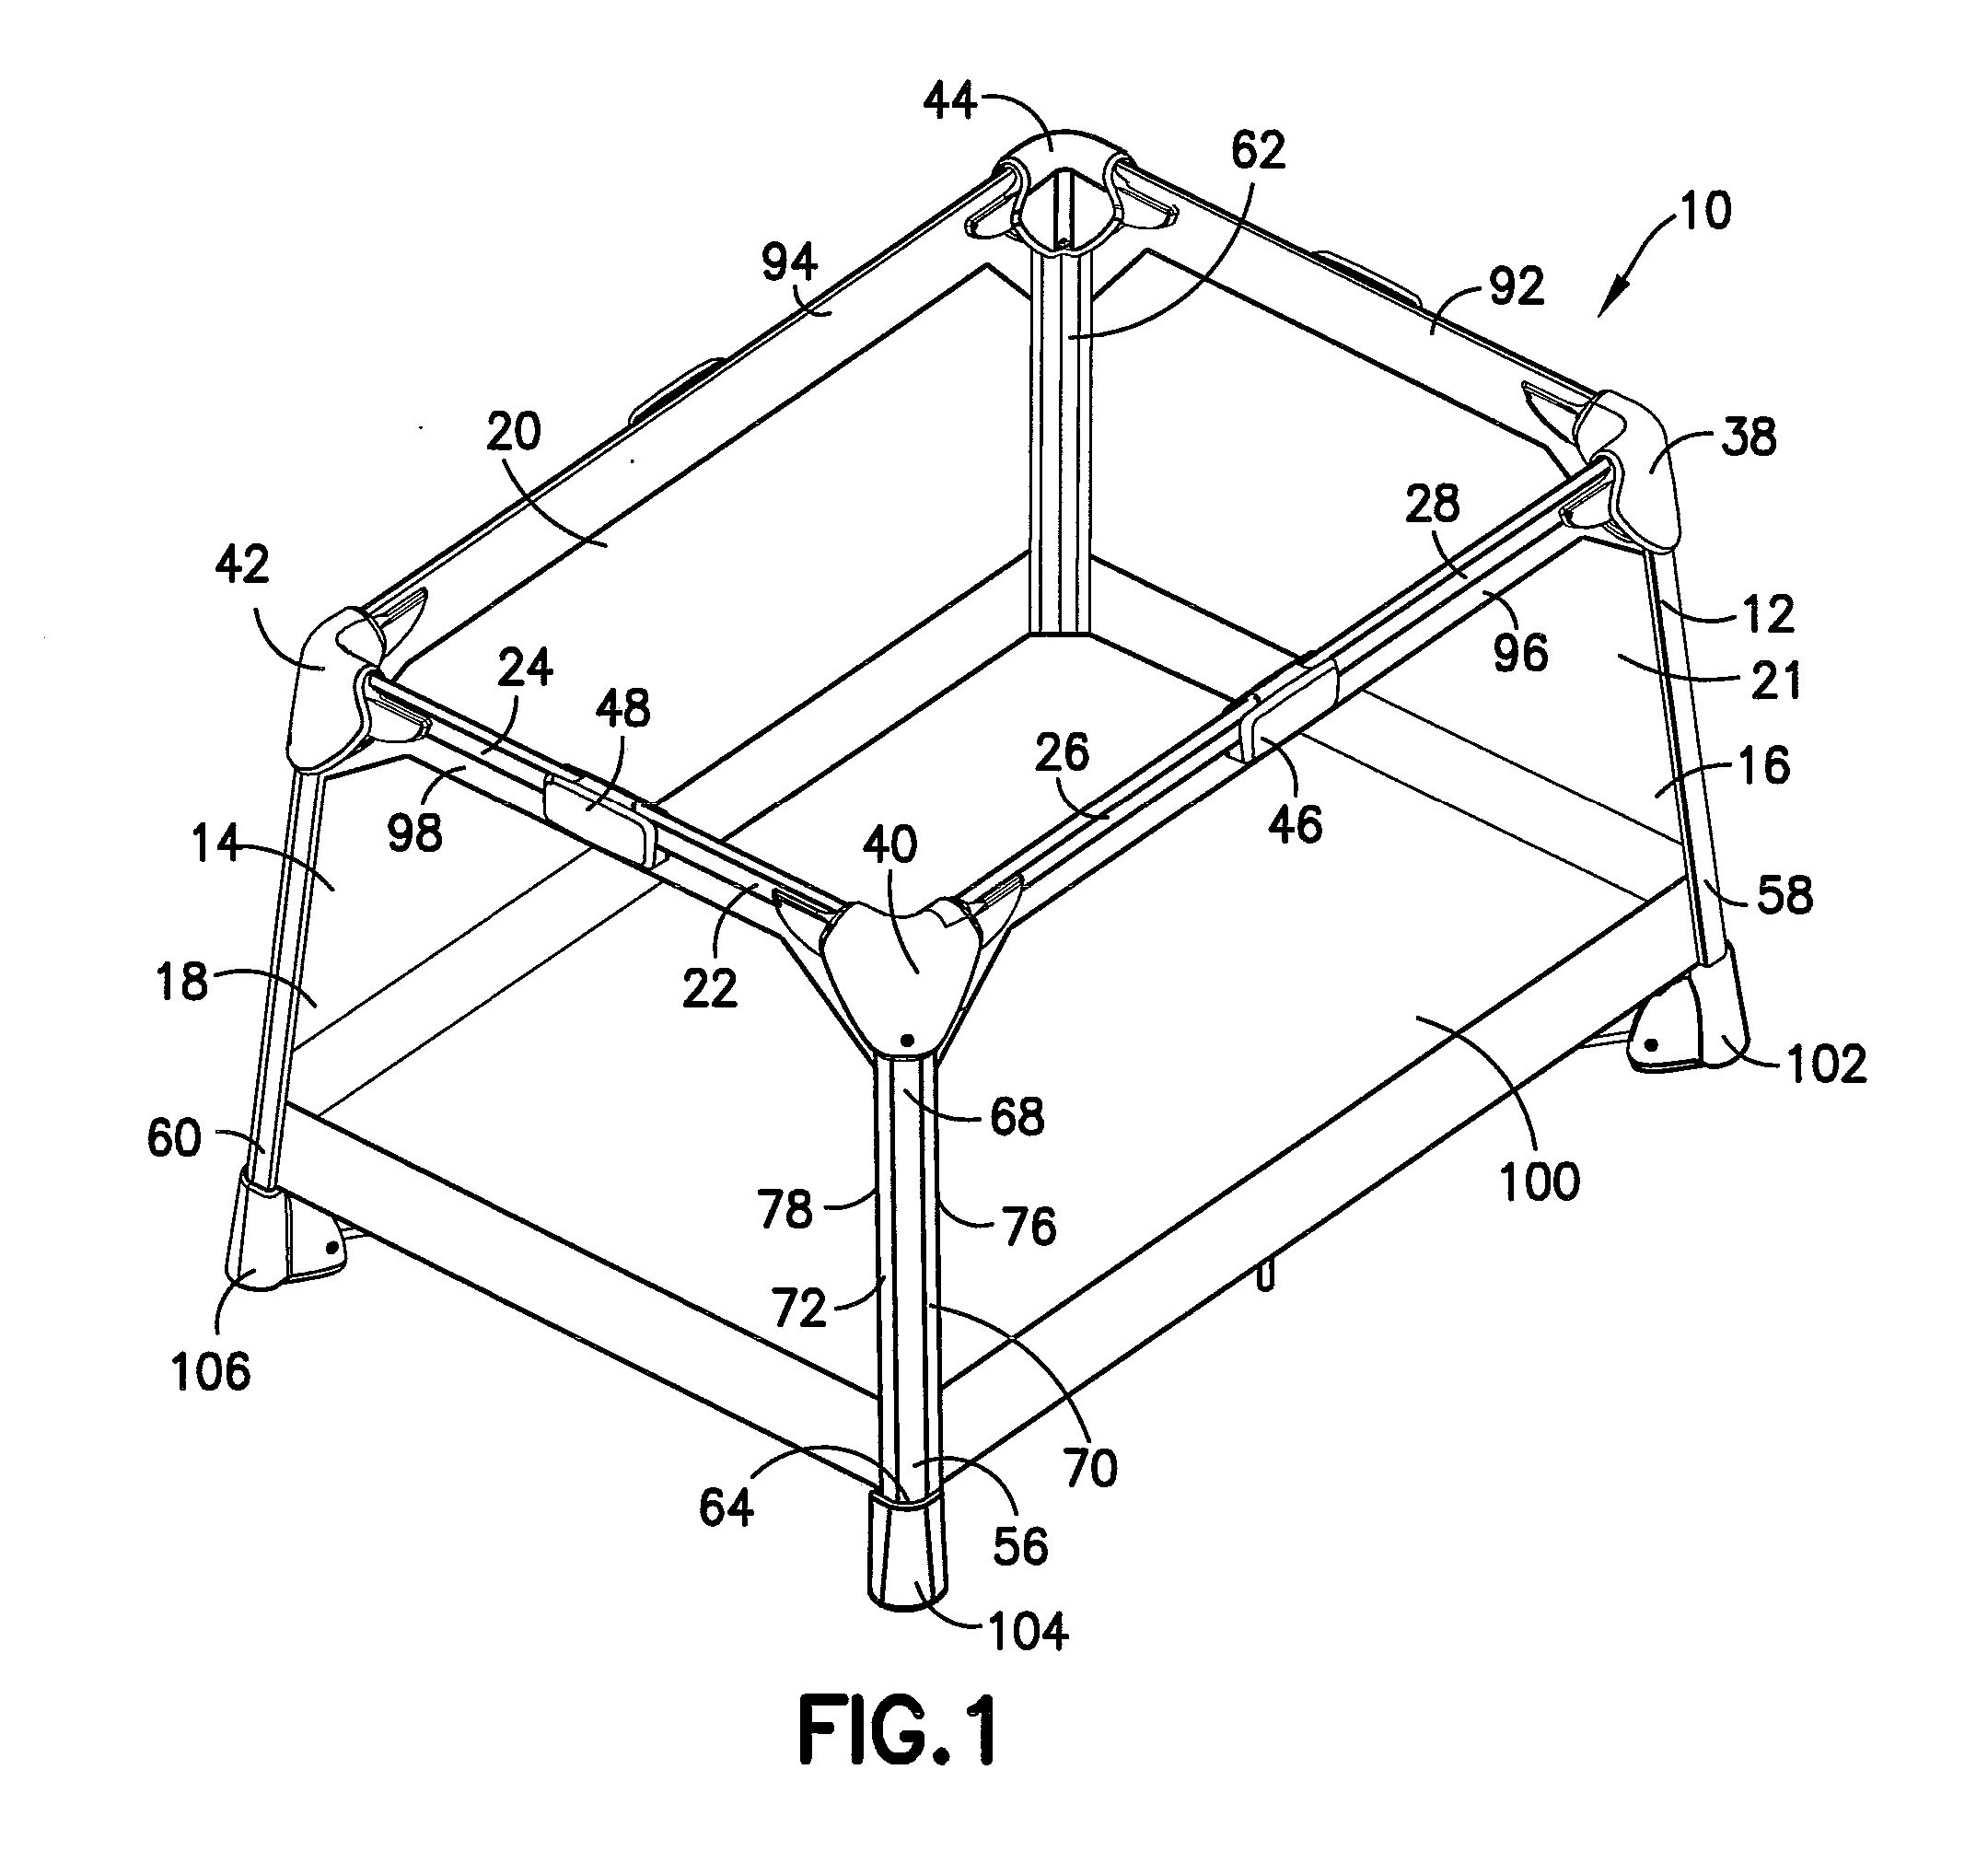 Foldable Play Yard Apparatus Including a Clamp and a Method of Attaching a Flexible Sheet to the Clamp